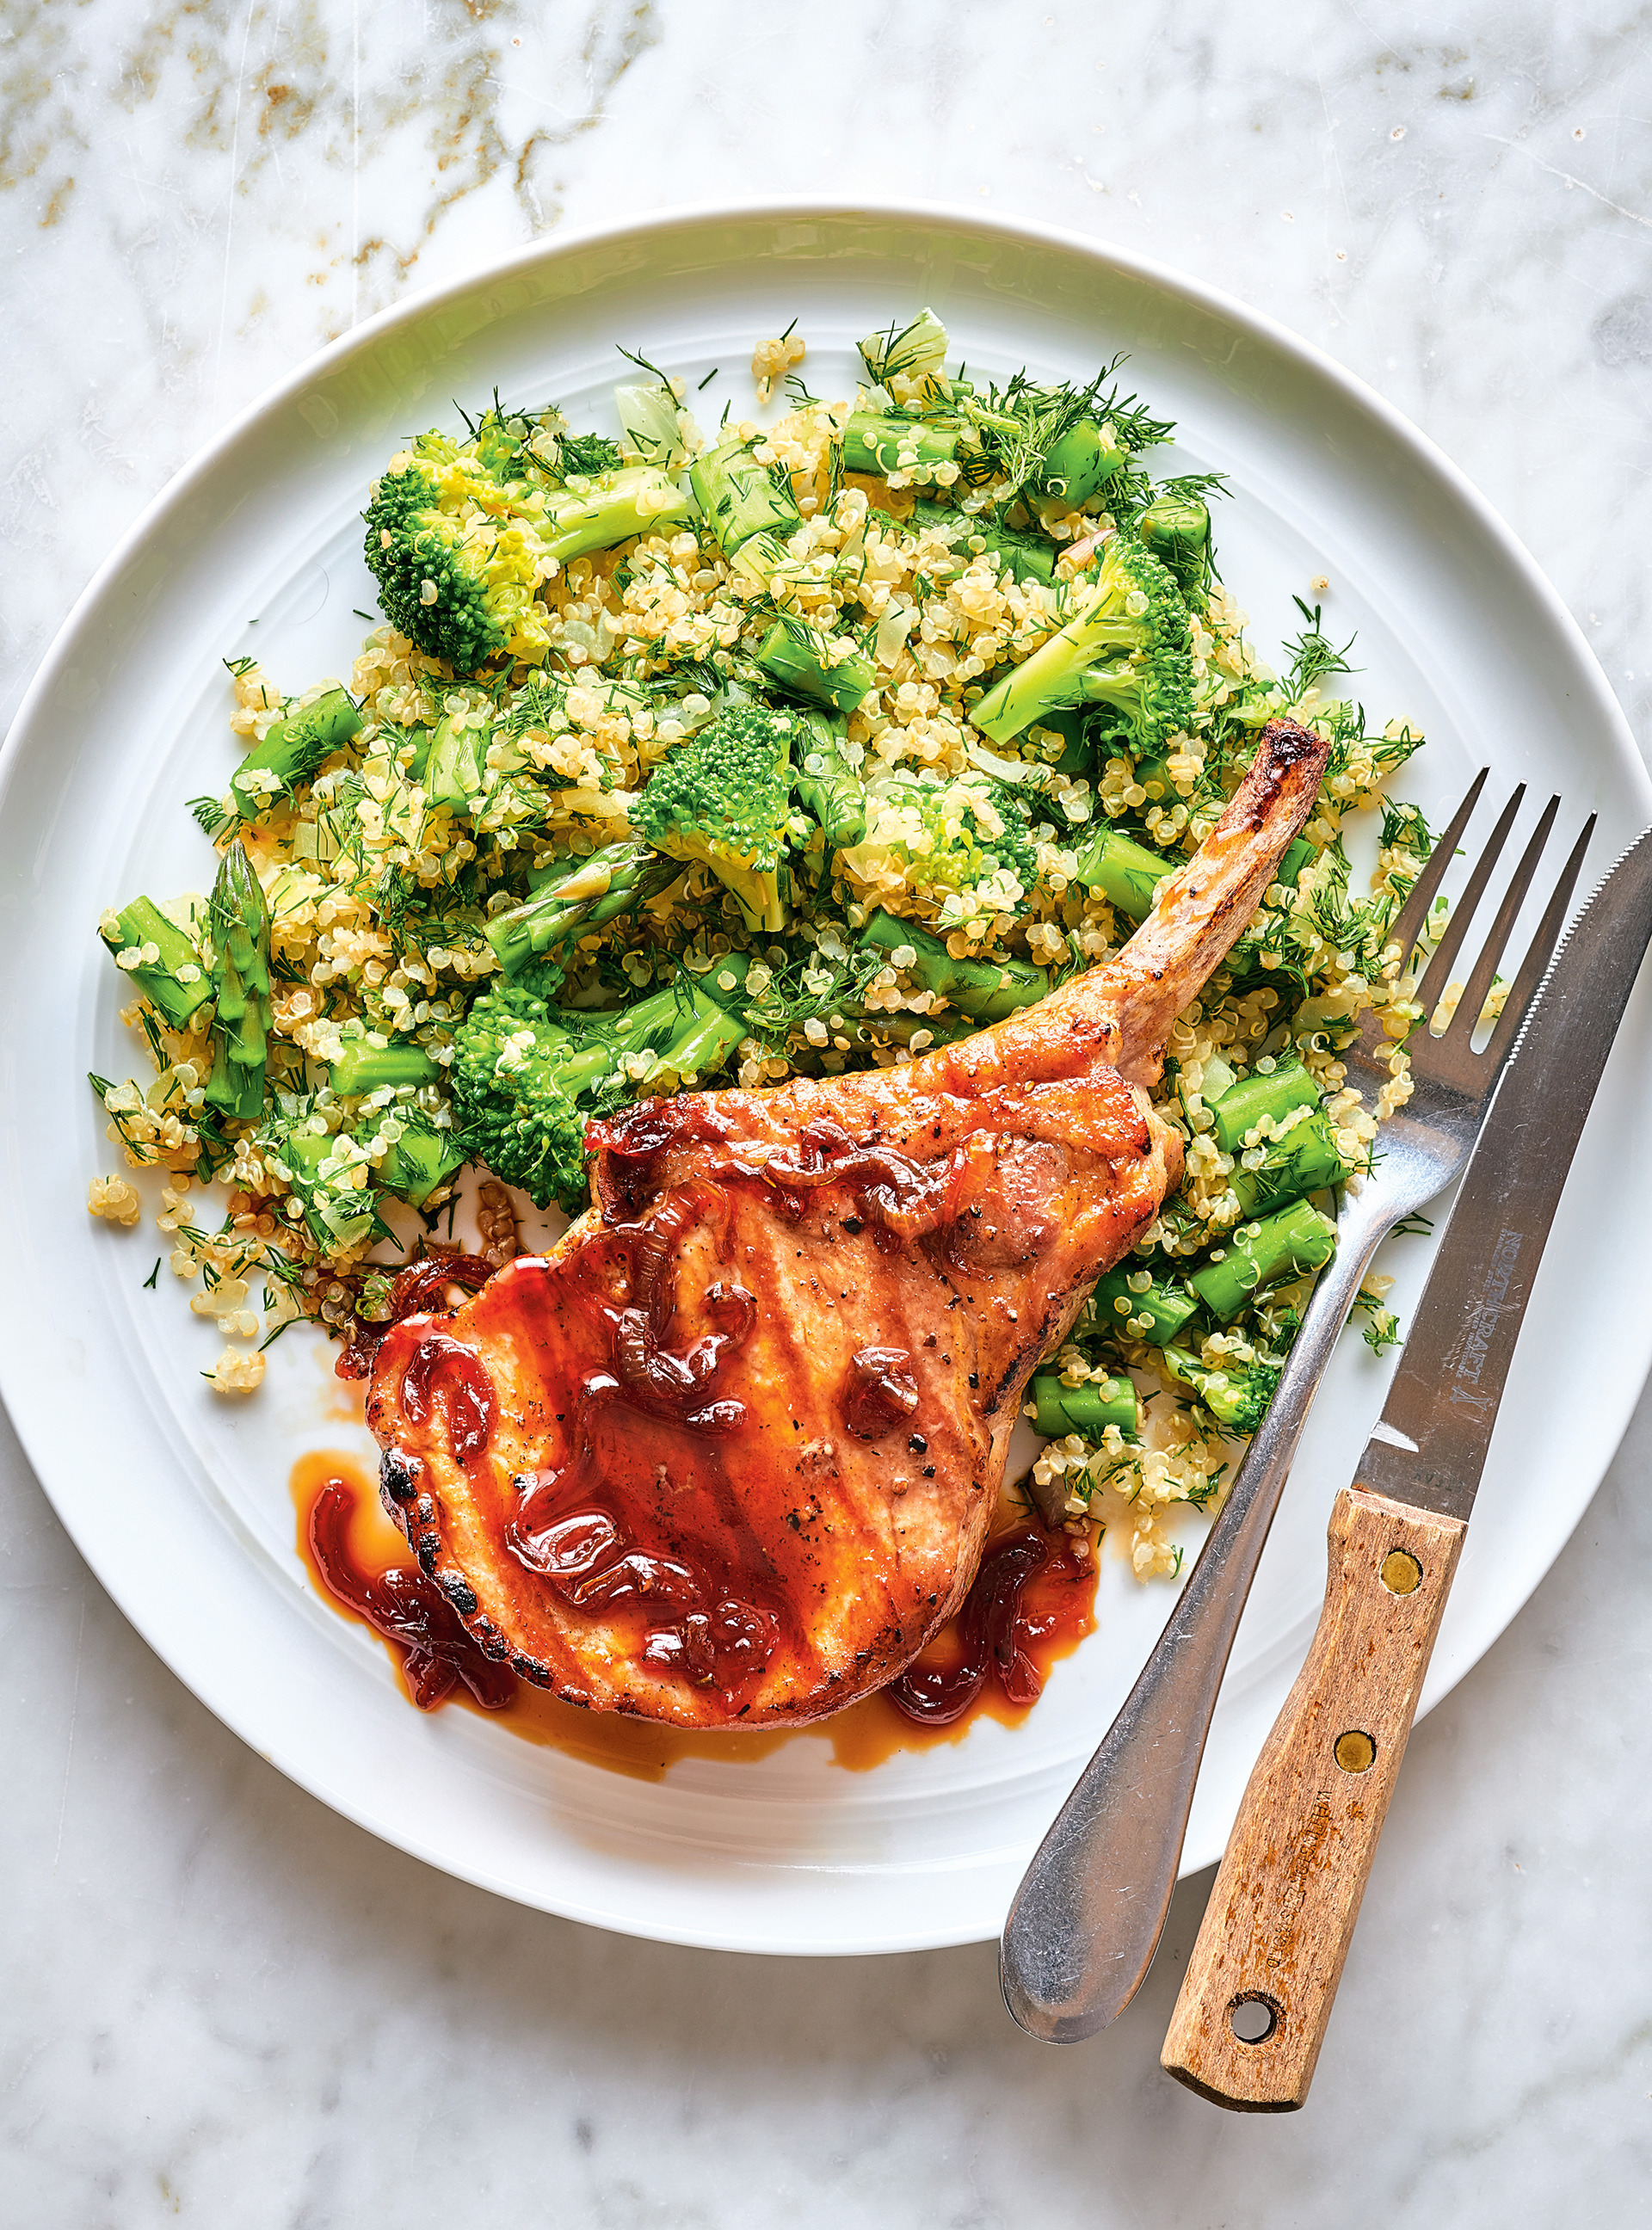 Grilled Pork Chops and Quinoa with Broccoli and Asparagus